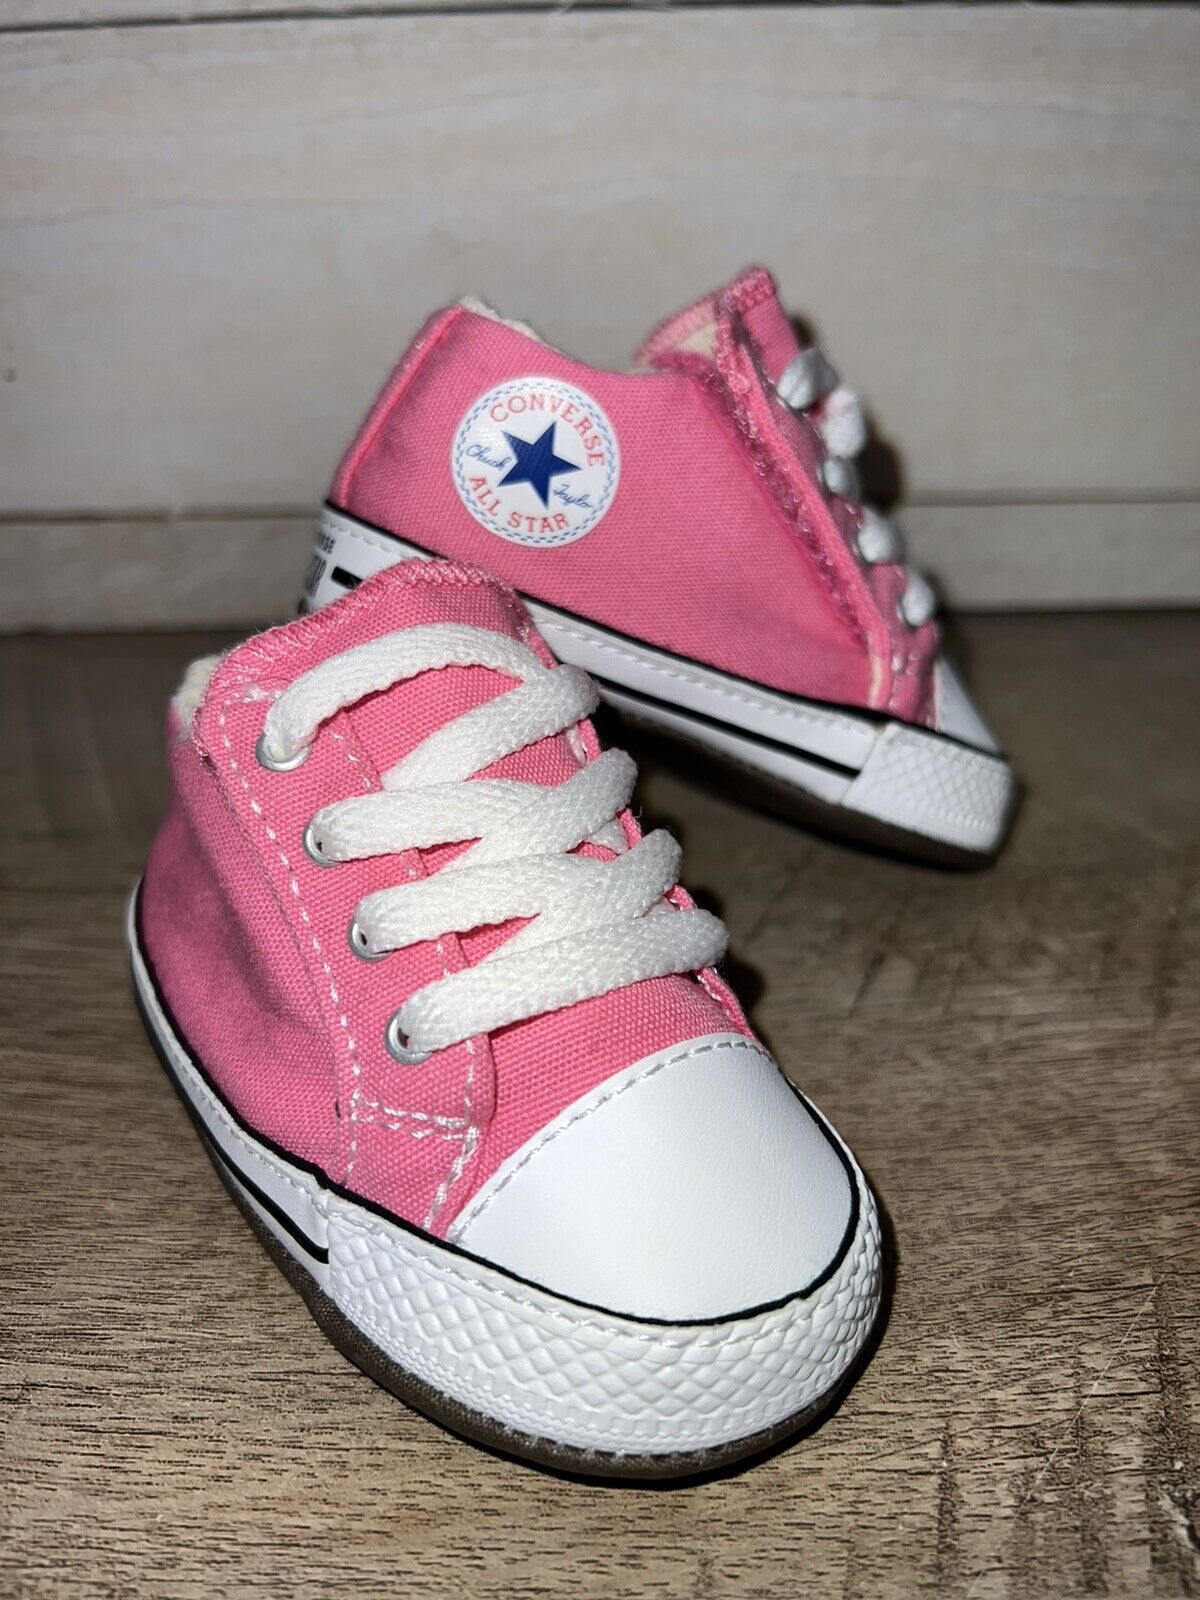 Converse Allstar Chuck Taylor Baby Shoes Size 1 Pink White Infant Girl |